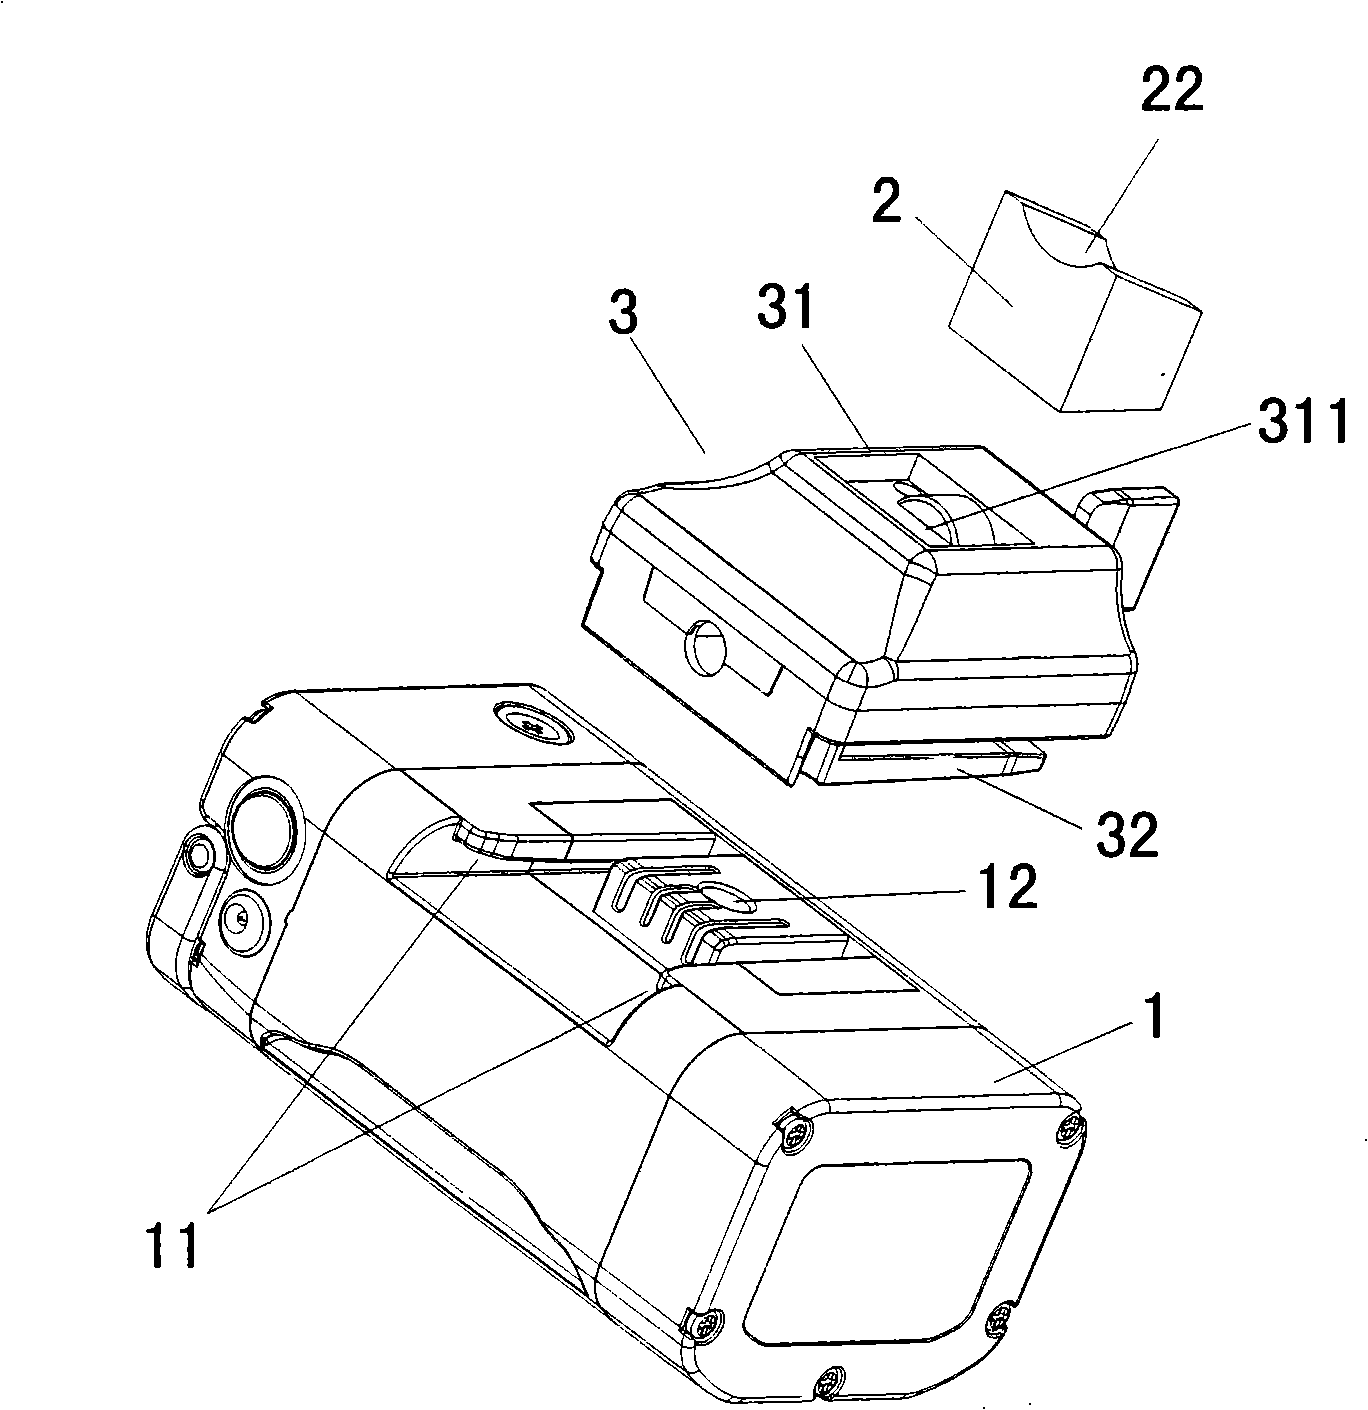 Power battery pack device convenient for changing installation position